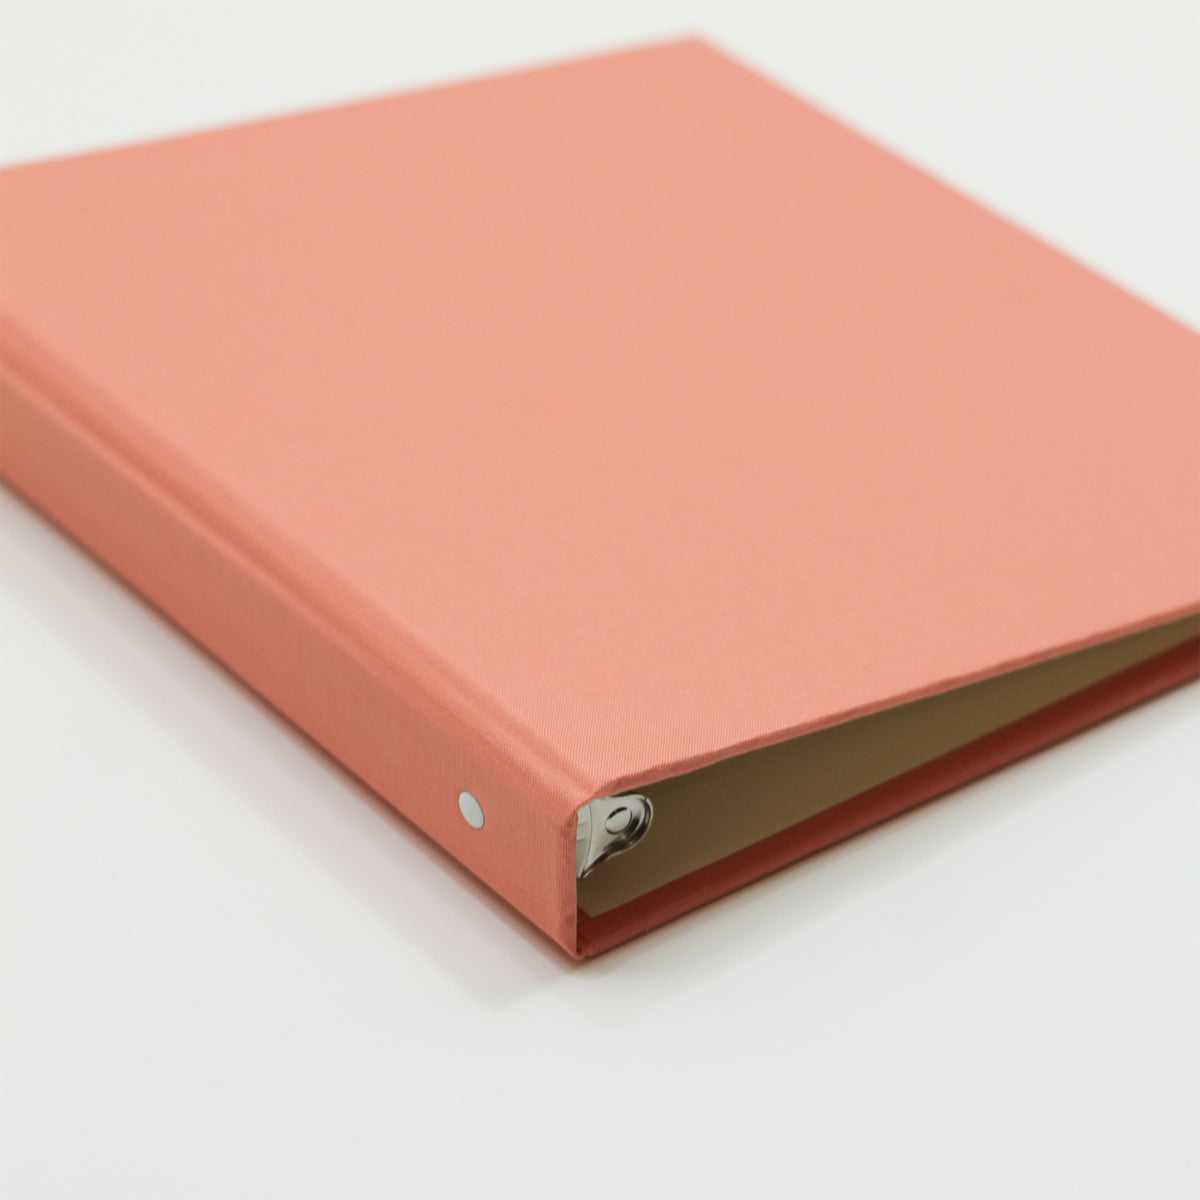 Storage Binder for Photos or Documents with Coral Cotton Cover